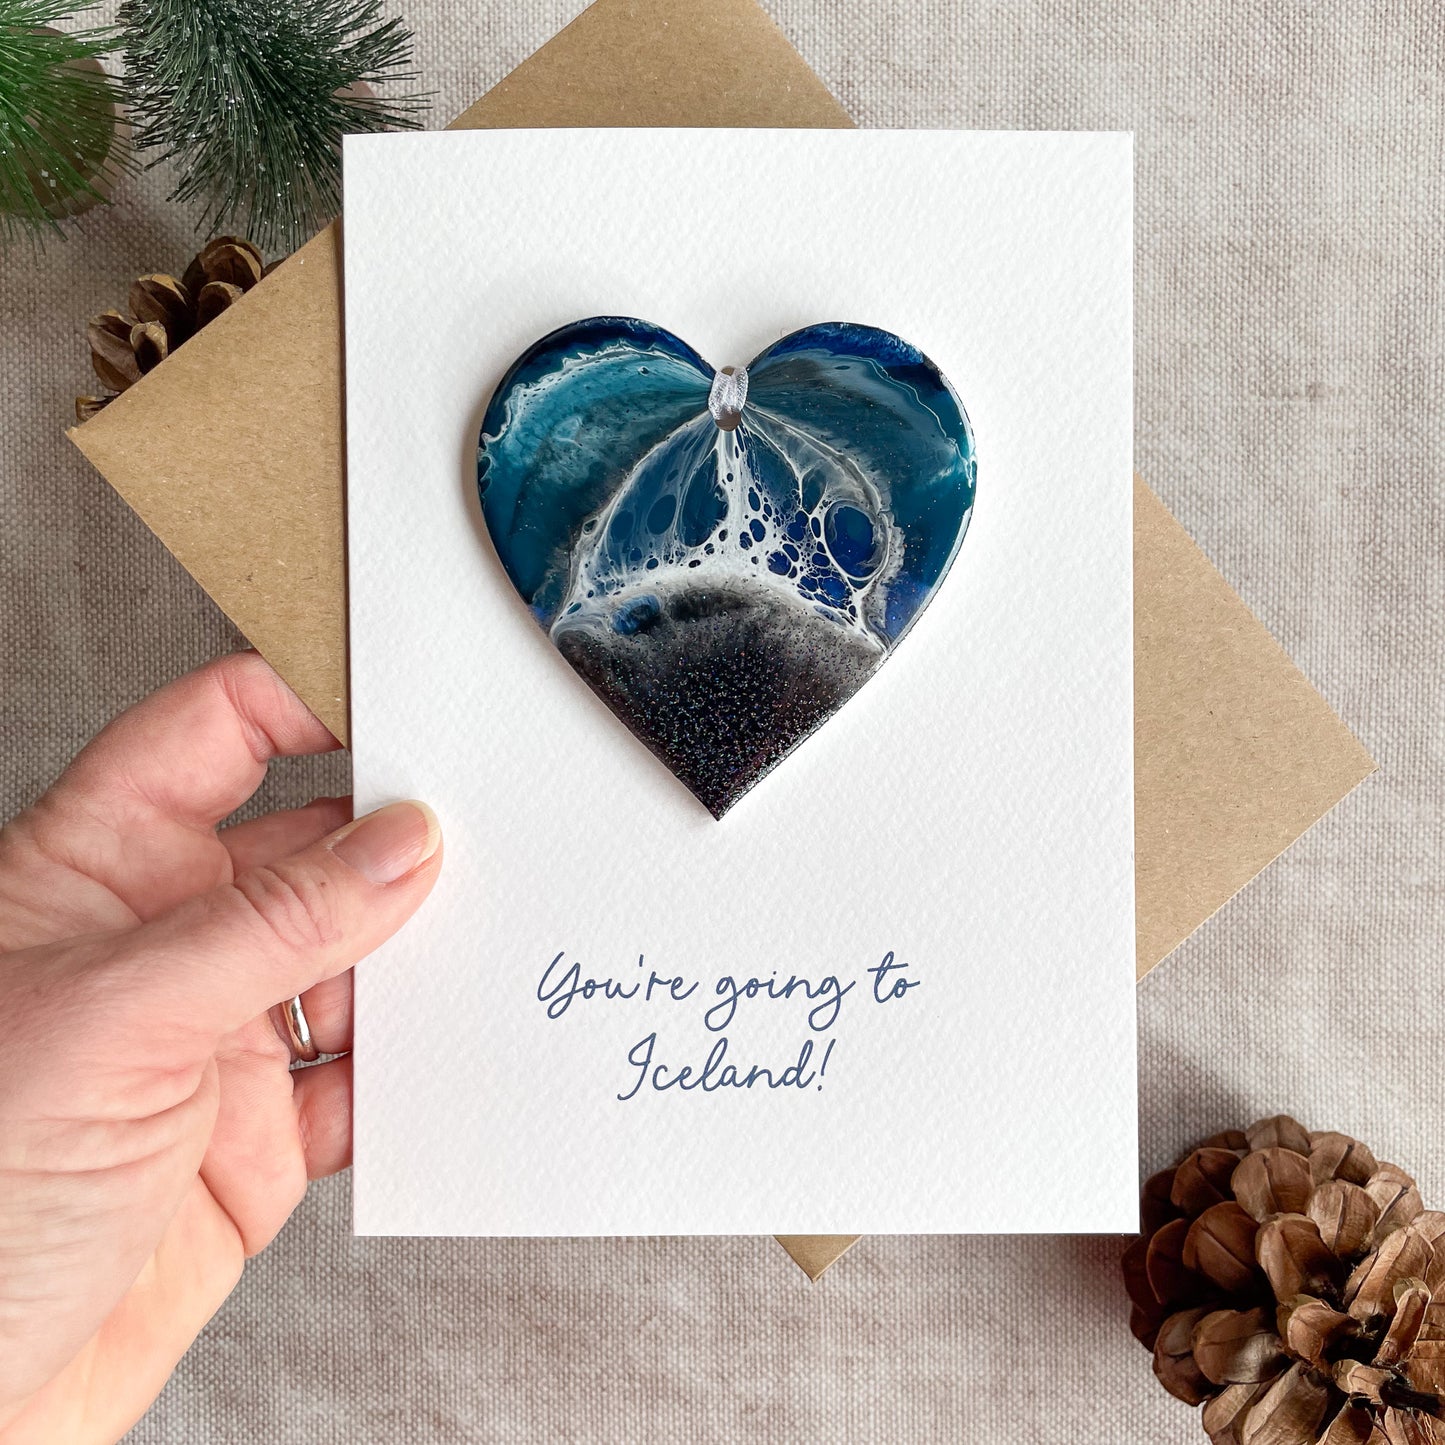 Icelandic Black Beach Heart Hanging Decoration with/without Greeting Card